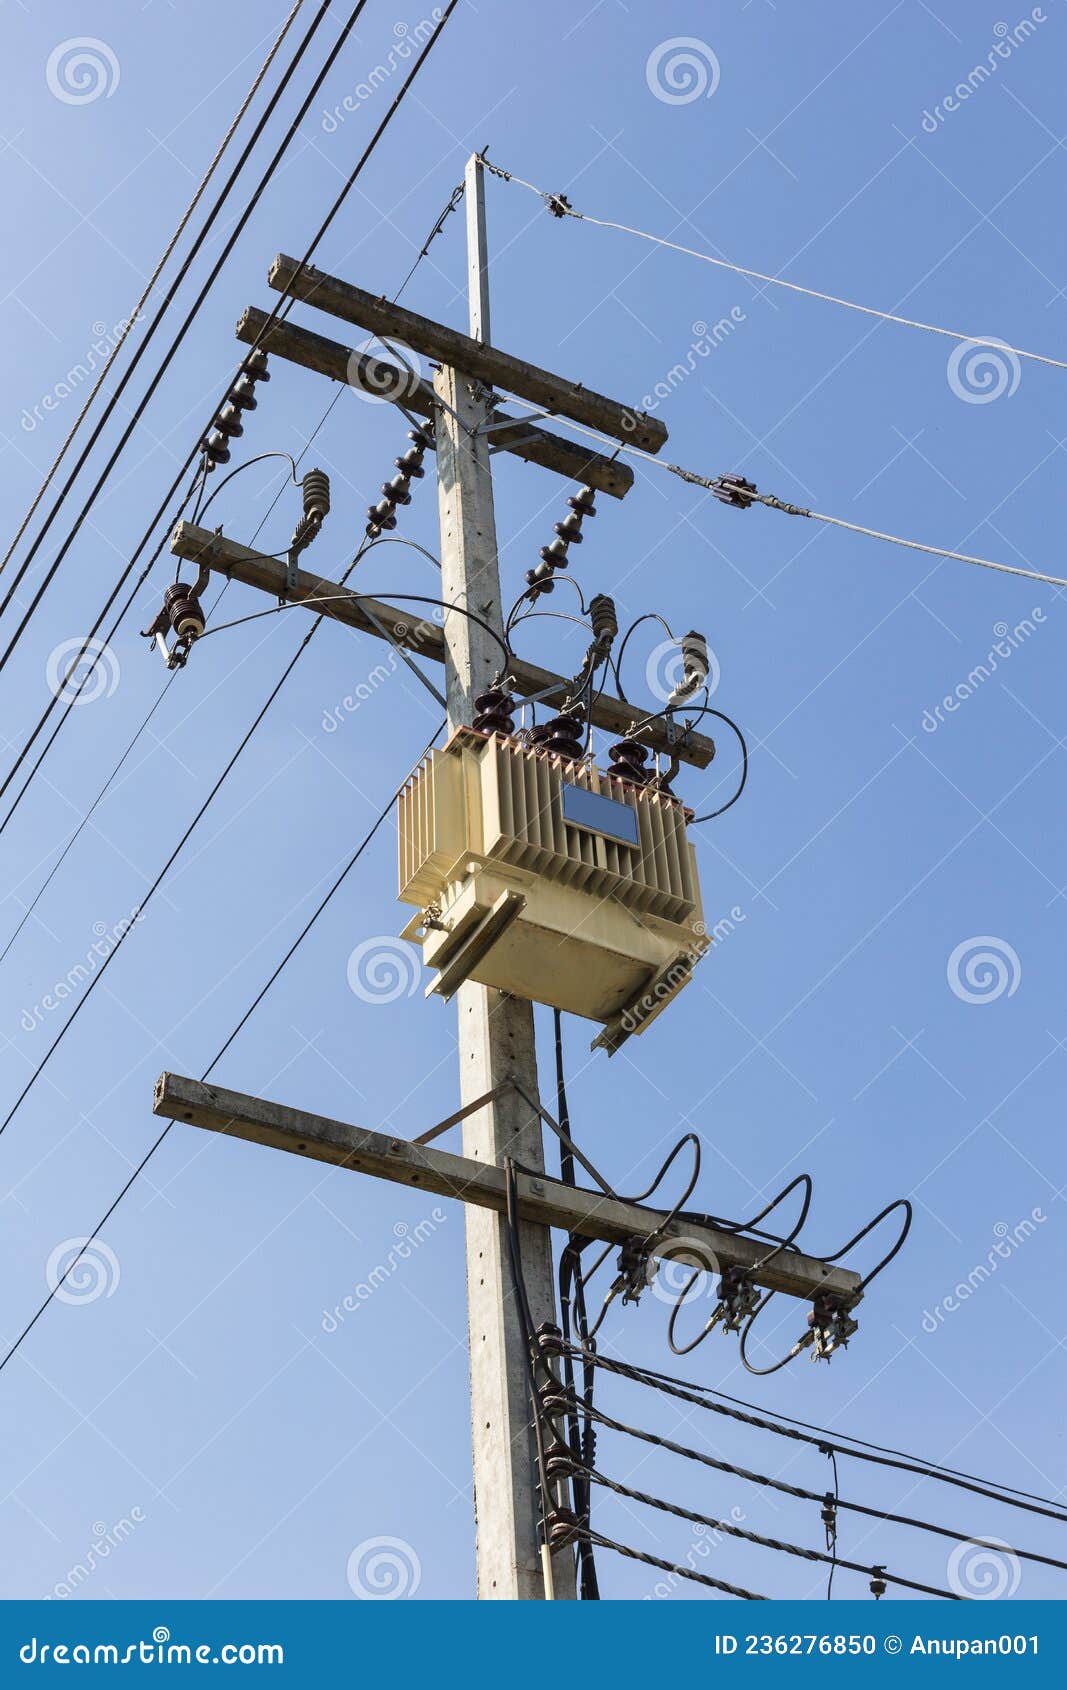 Electric Transformer Substation On Blue Sky Background Stock Photo